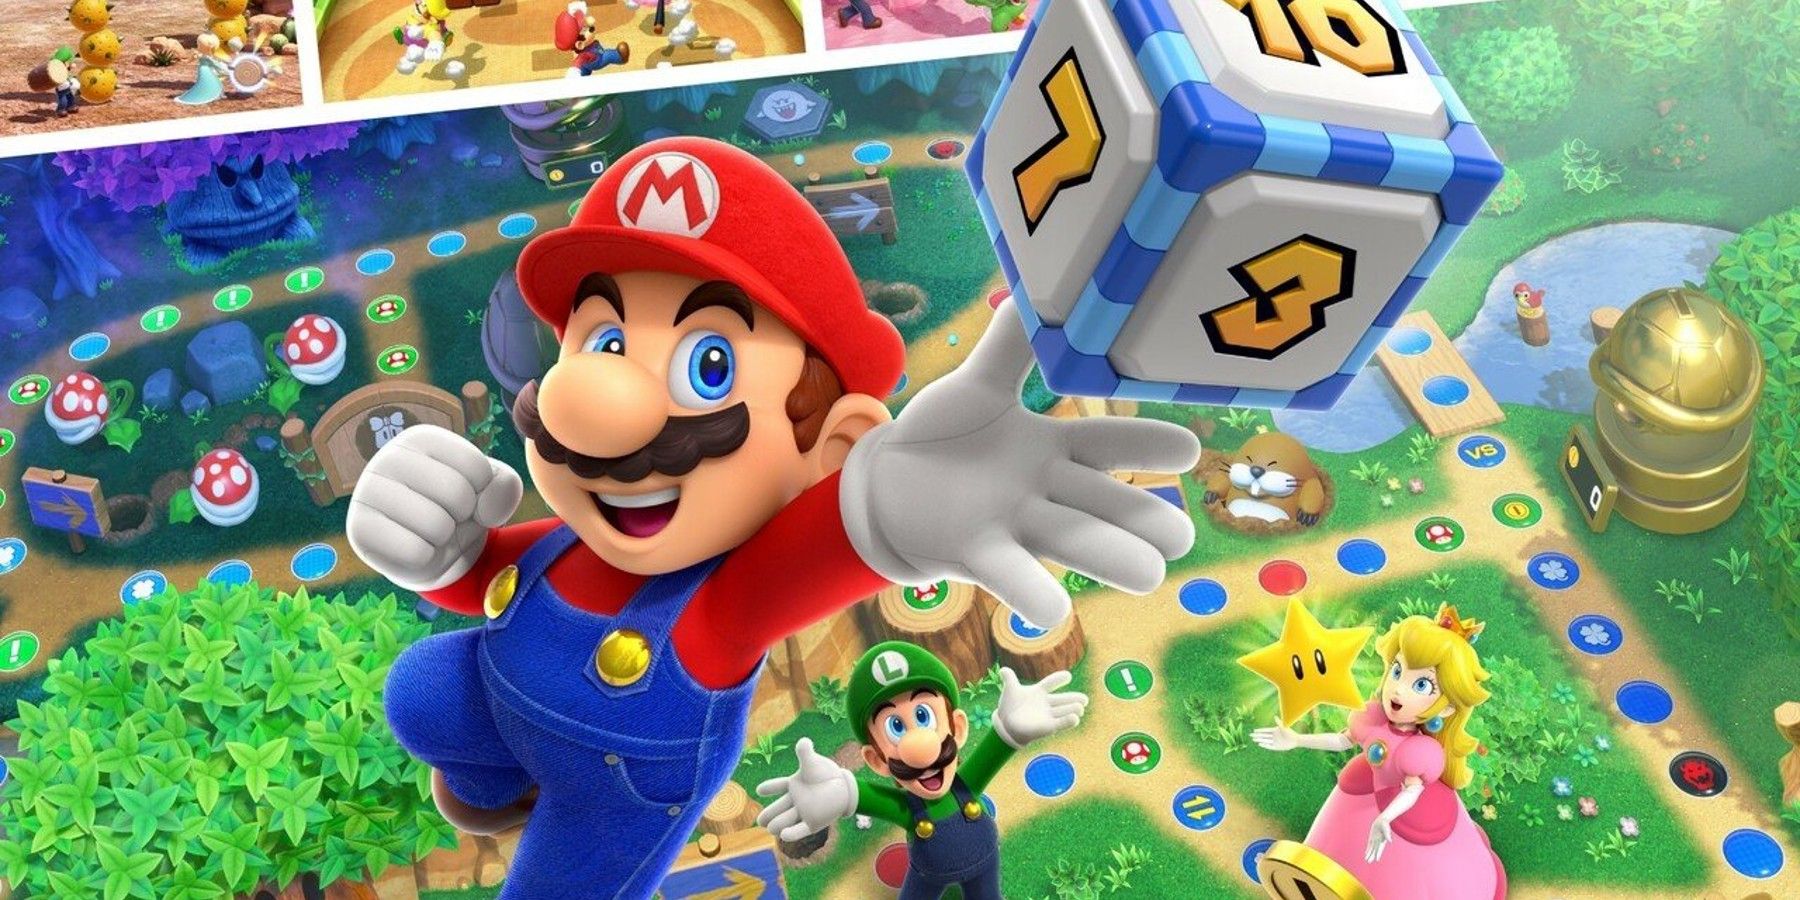 Fan Poster Combines Mario Party and Squid Game